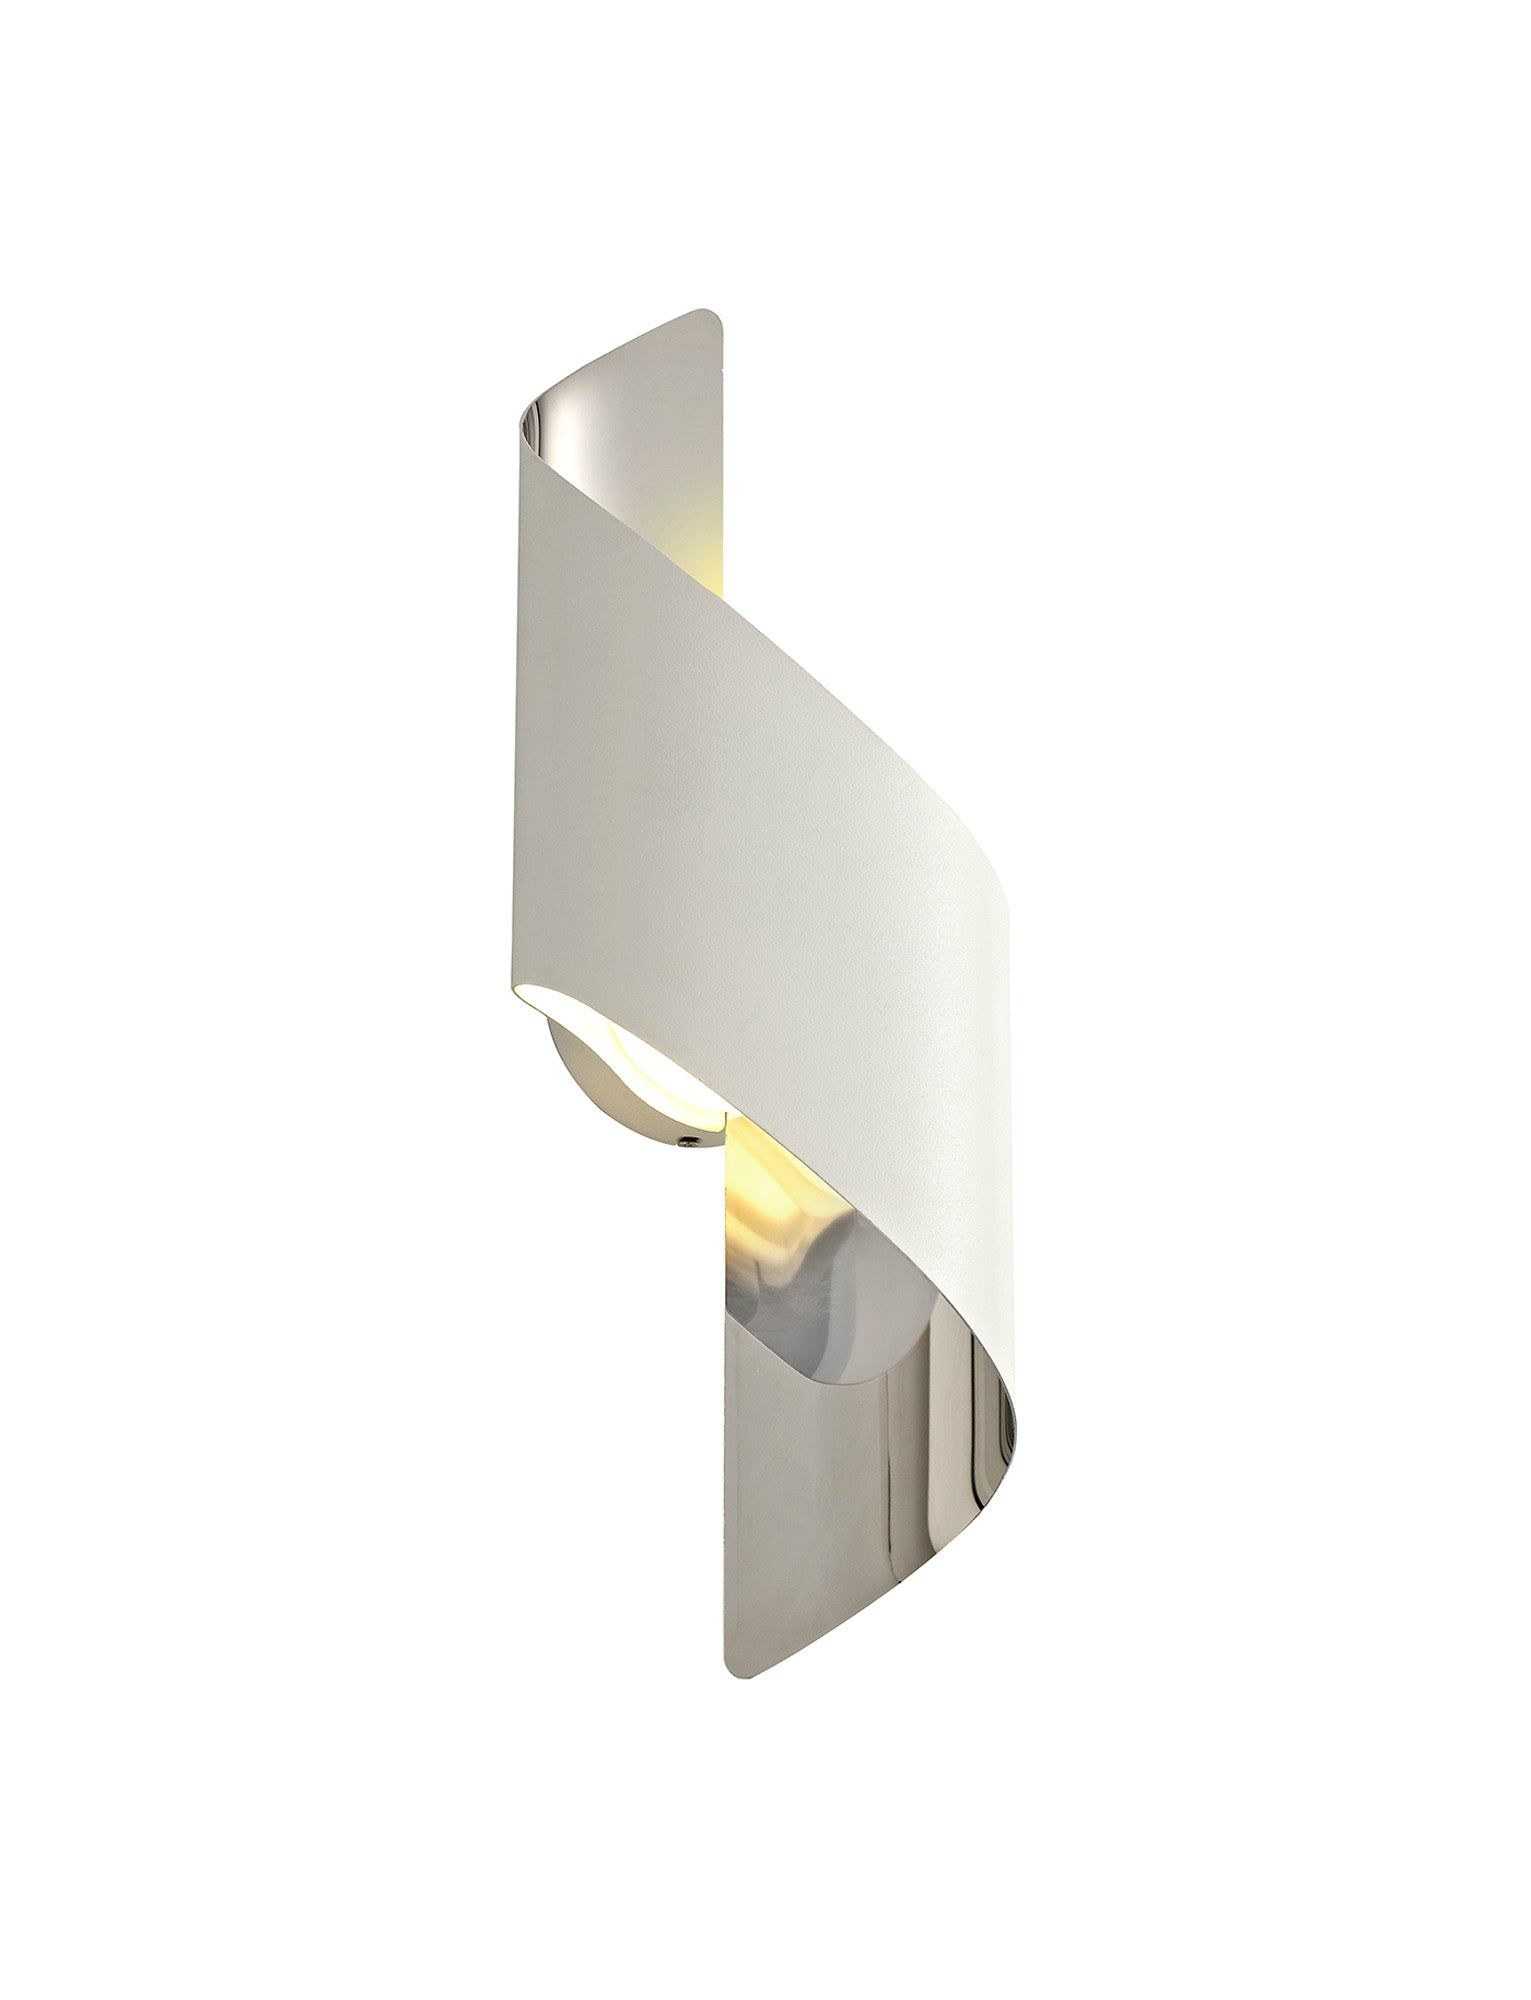 Cubby Wall Lamp Small, 1 x 8W LED, 3000K, 640lm, White/Polished Chrome, 3yrs Warranty